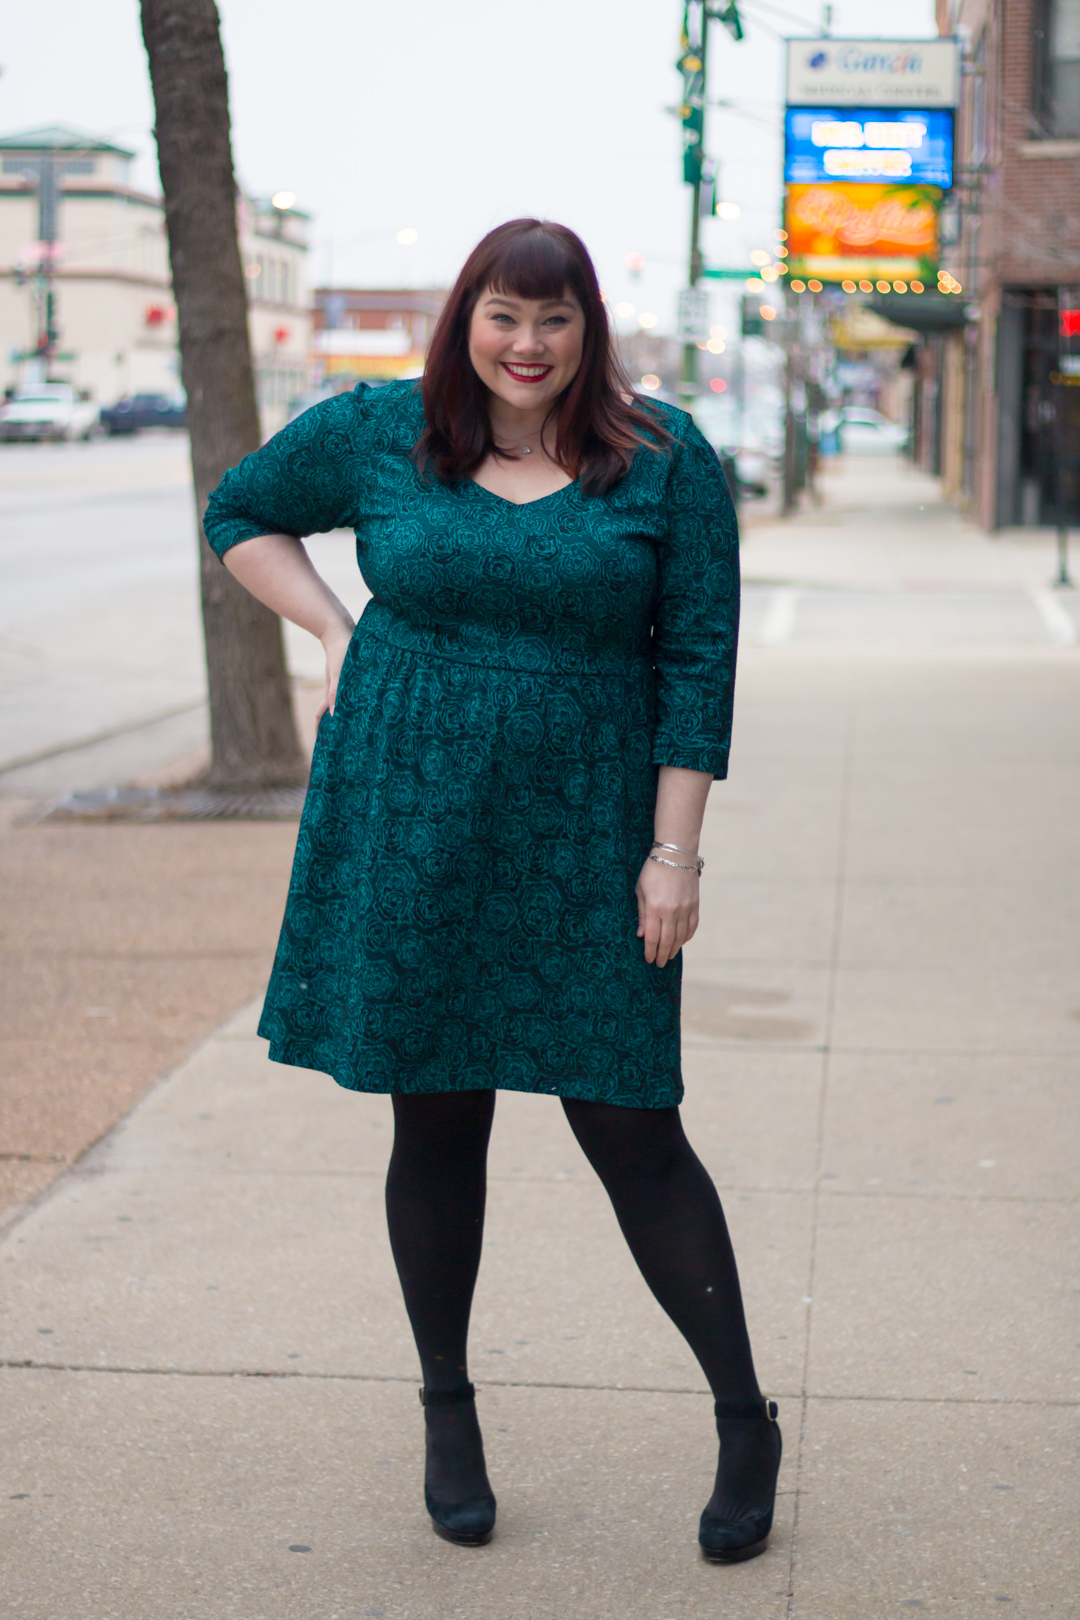 Plus Size Blogger Amber from Style Plus Curves in a Melissa Masse Dress from Gwynnie Bee